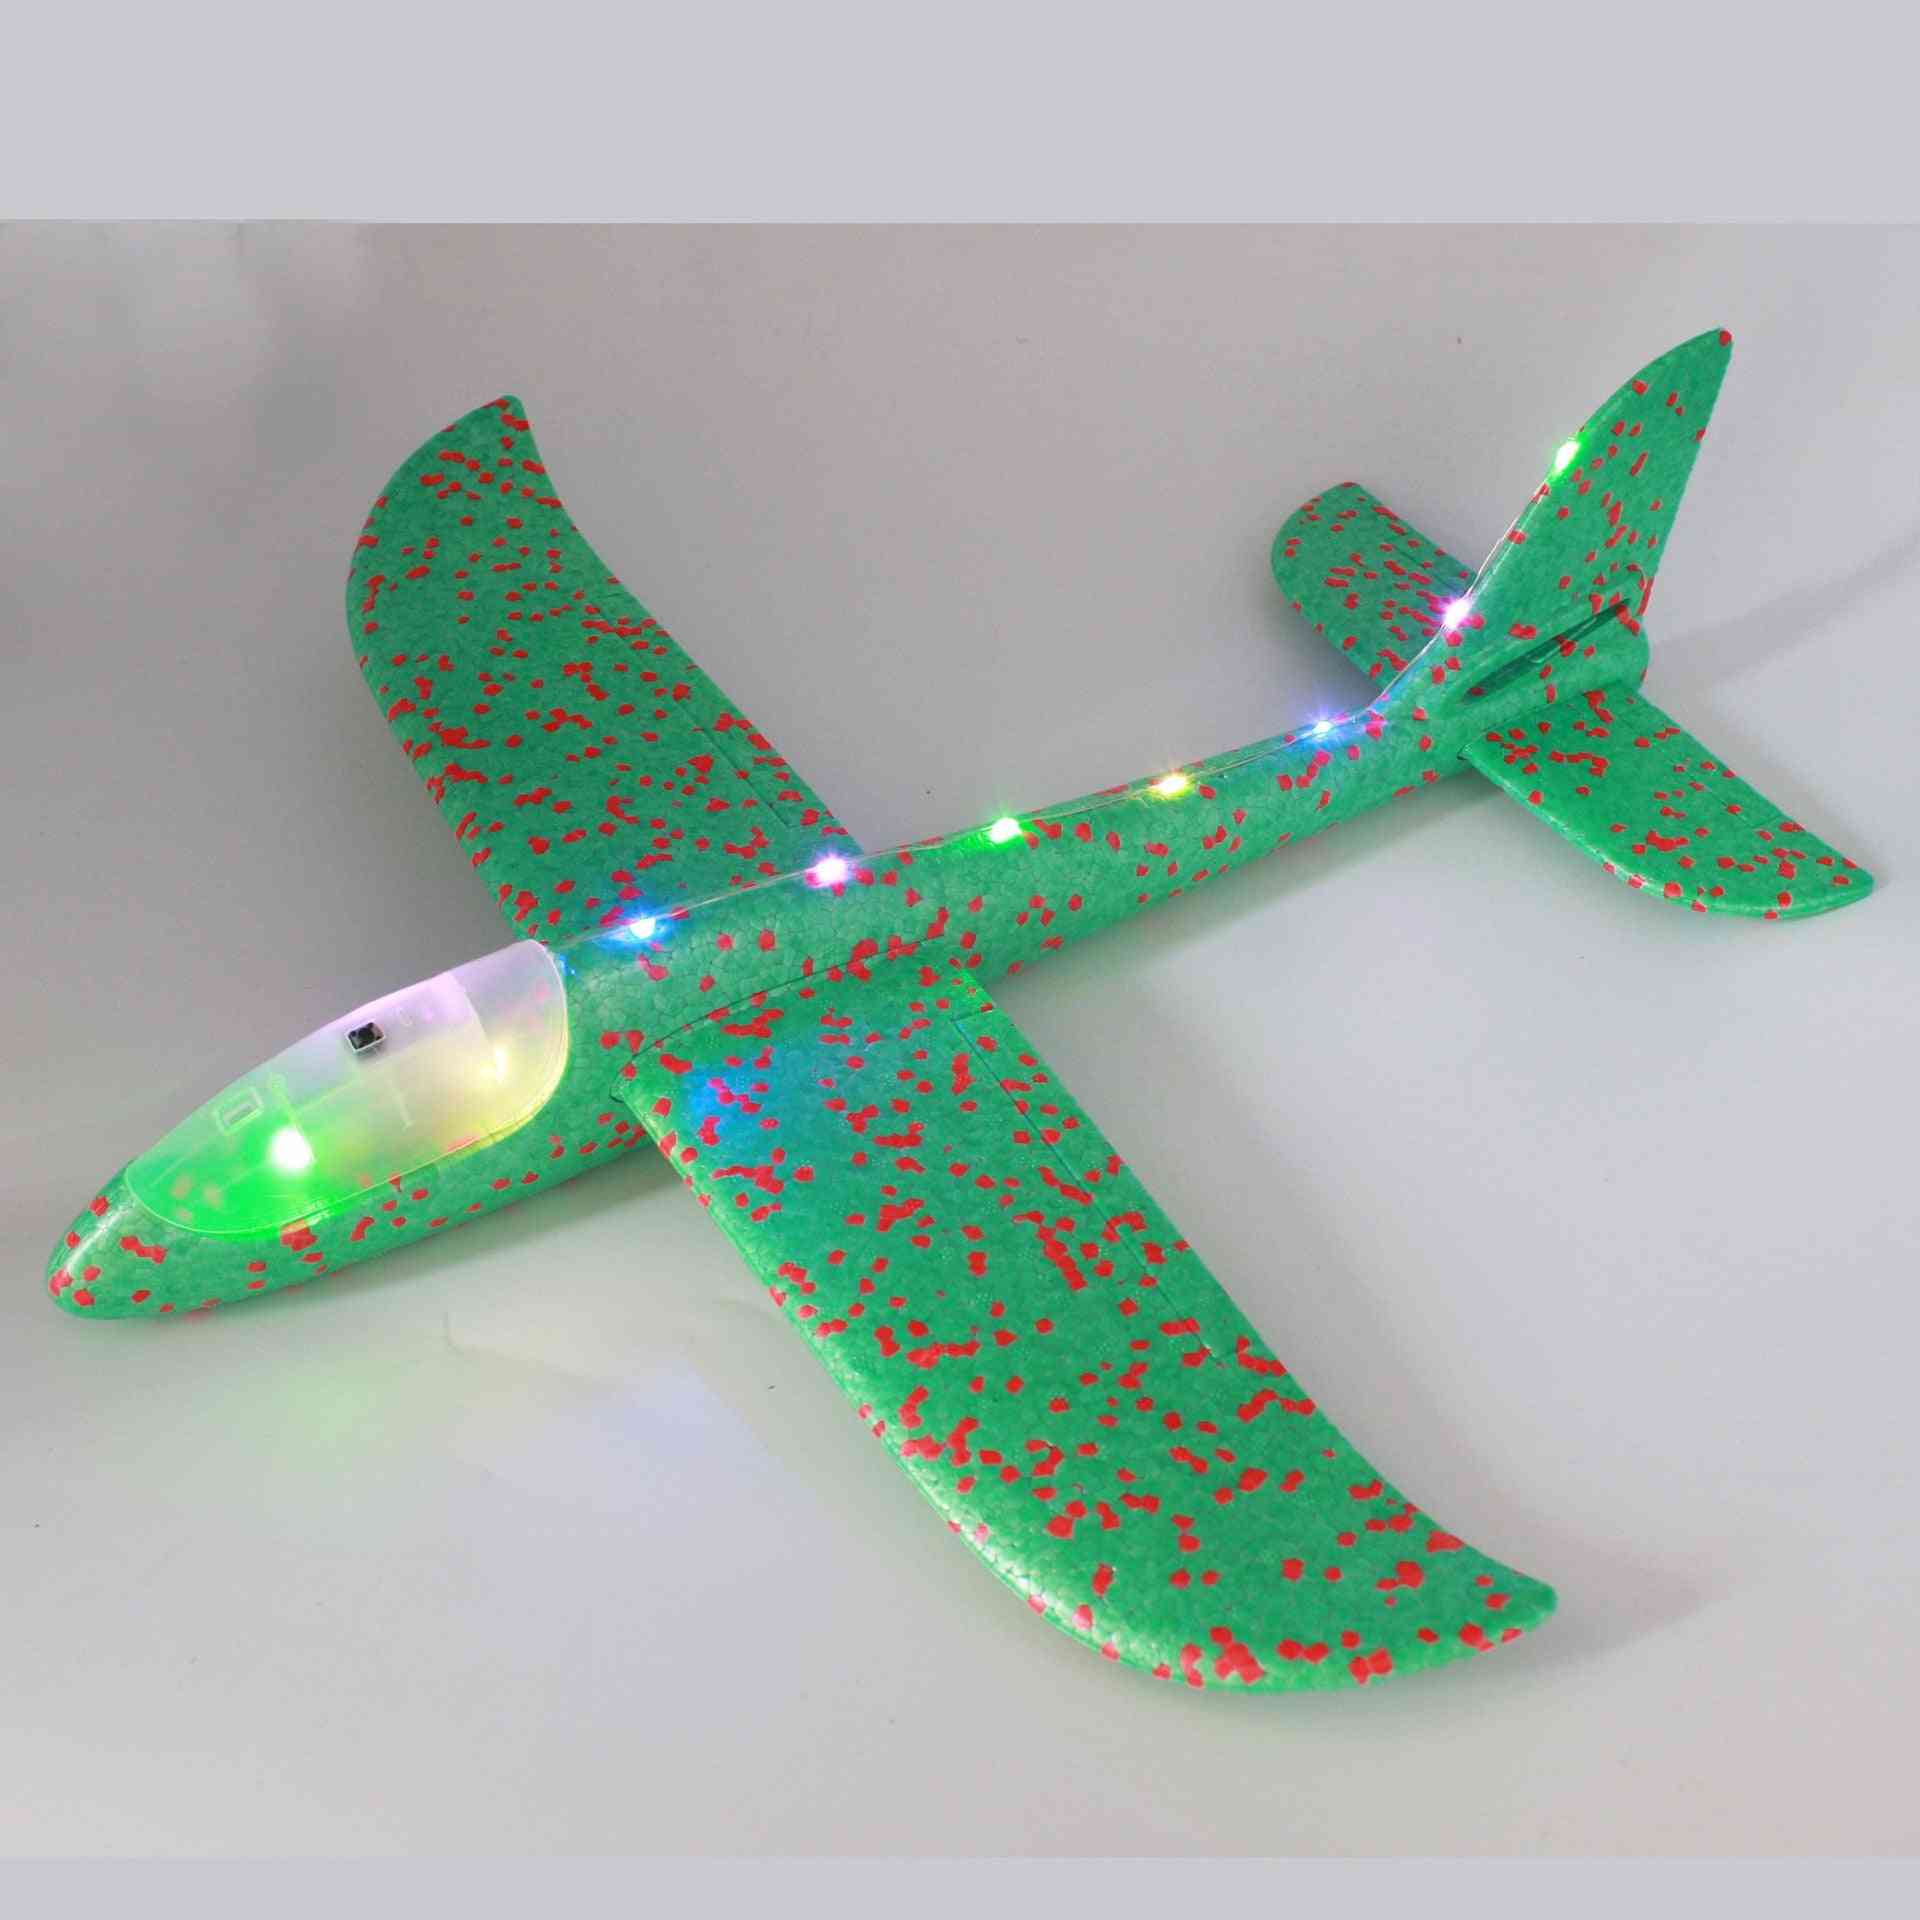 Foam Hand Throwing Led Airplanes Toy